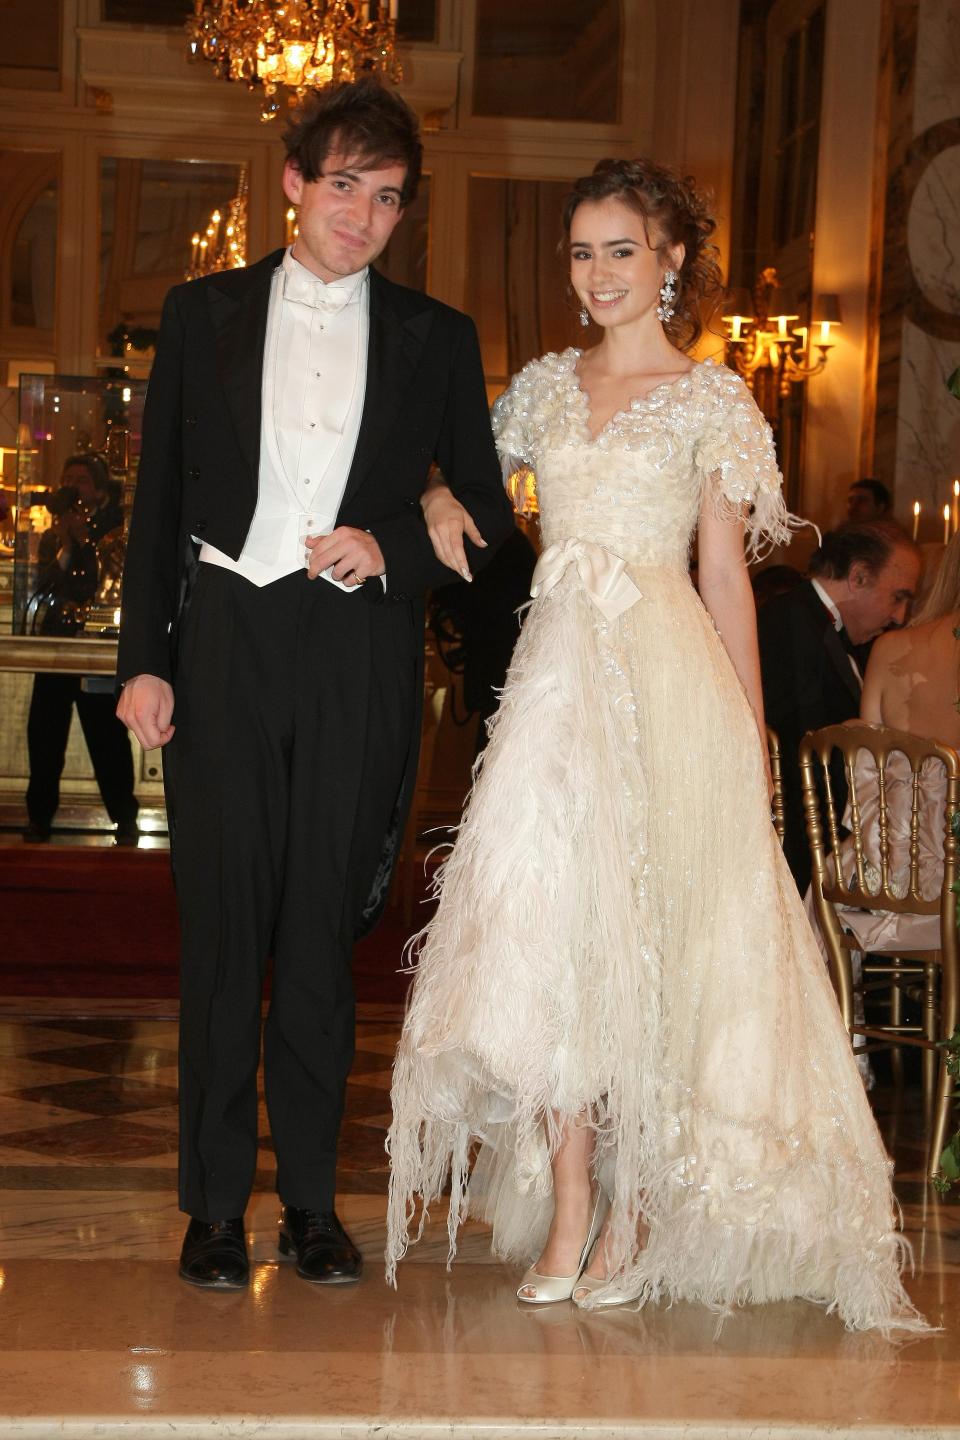 Lily Collins pictured with her cavalier Richard Dennen at Le Bal in 2007.